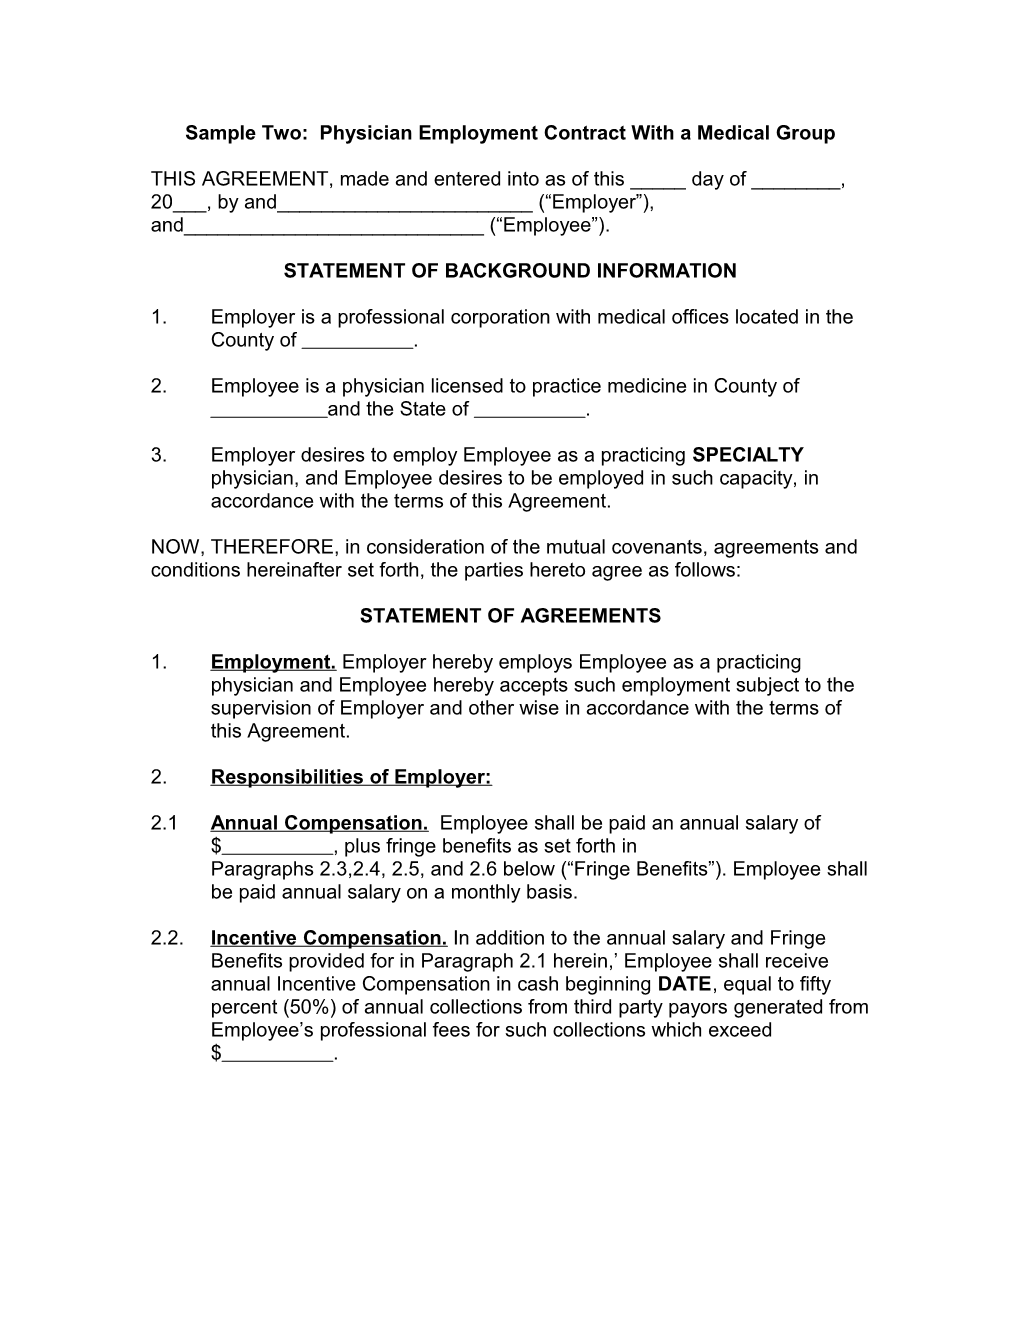 Sample Medical Group Employment Agreement